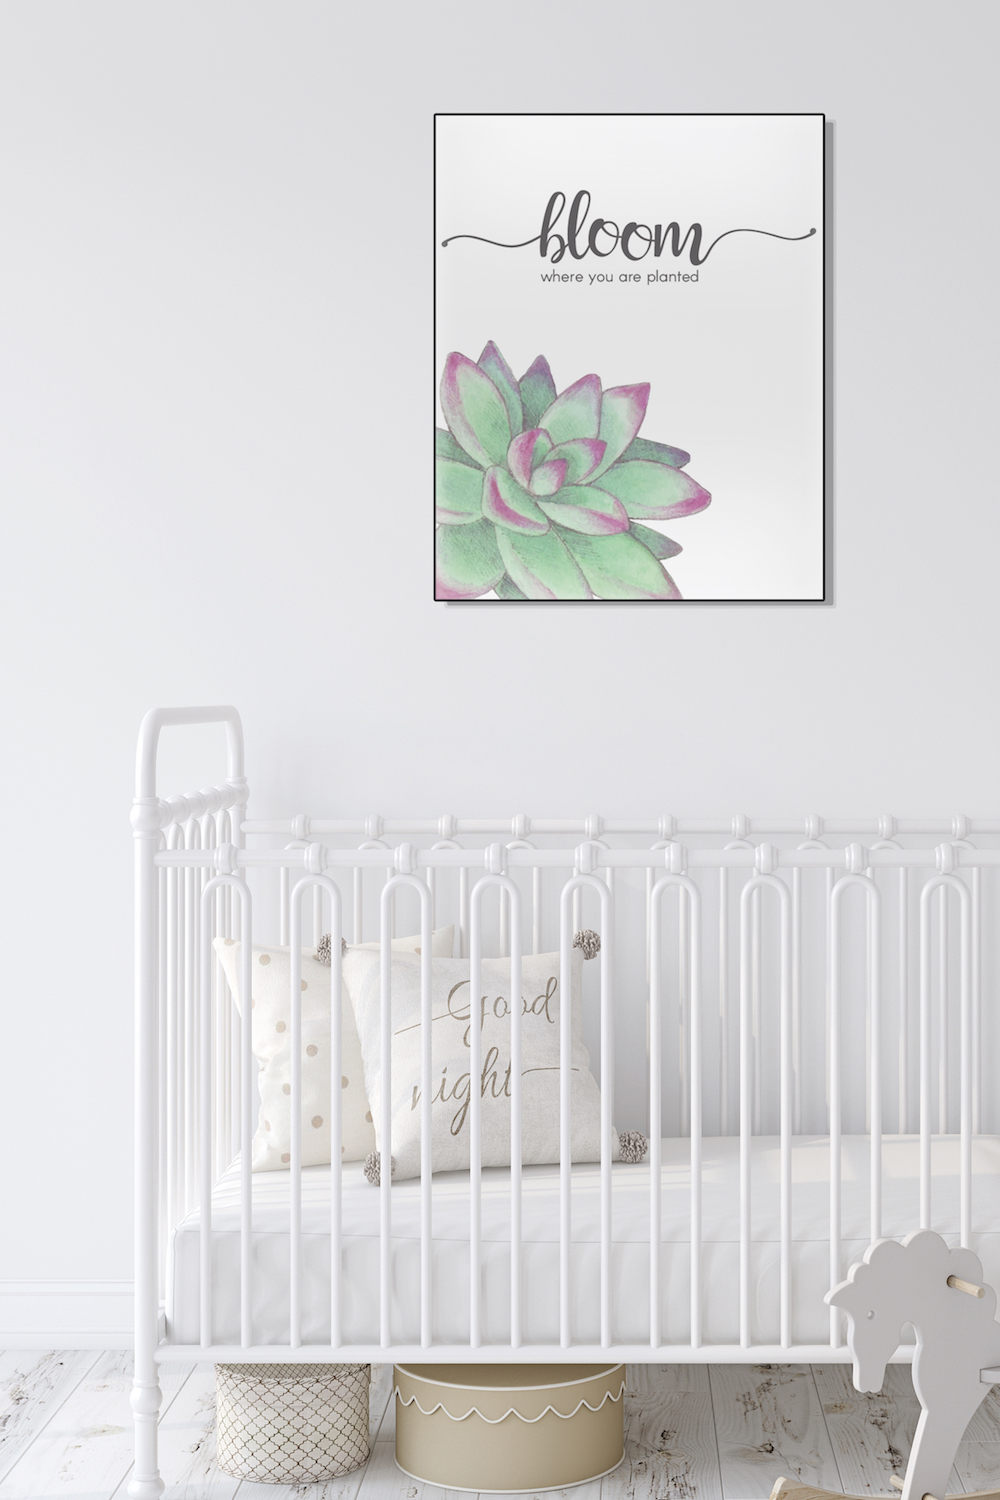 I needed a little uplifting somethin-somethin on my office wall, to mix-up the blah I'm feeling lately. This Succulent Wall Art Free Printable was the resulting piece that I just couldn't love more.